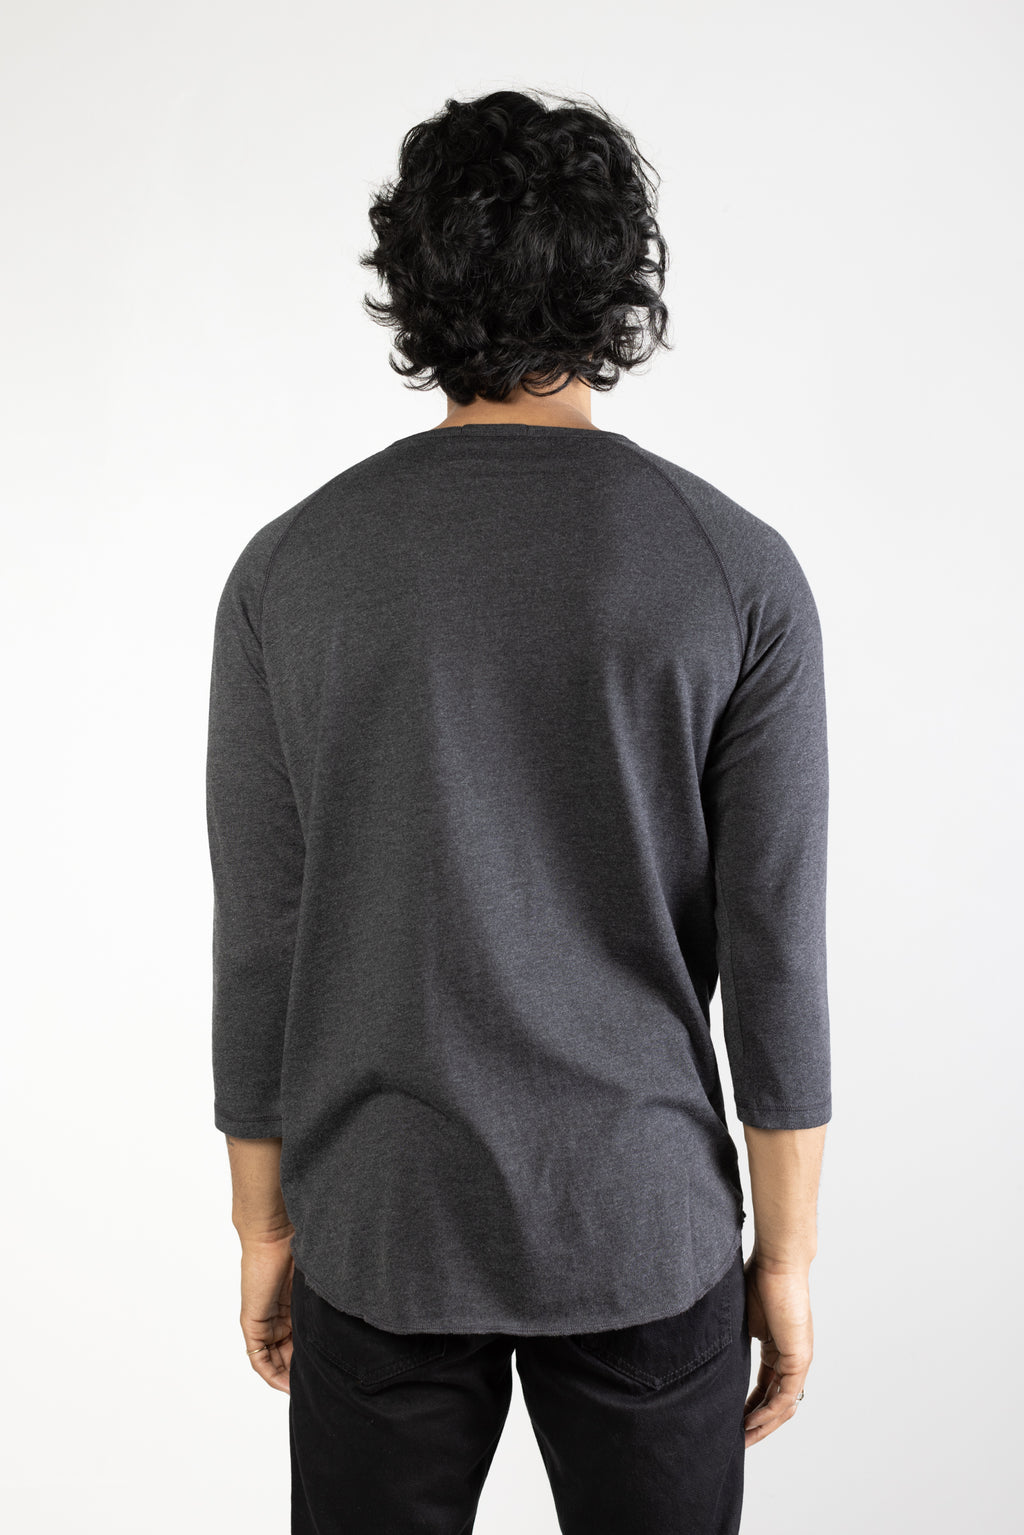 Tri Blend Henley in Charcoal 03